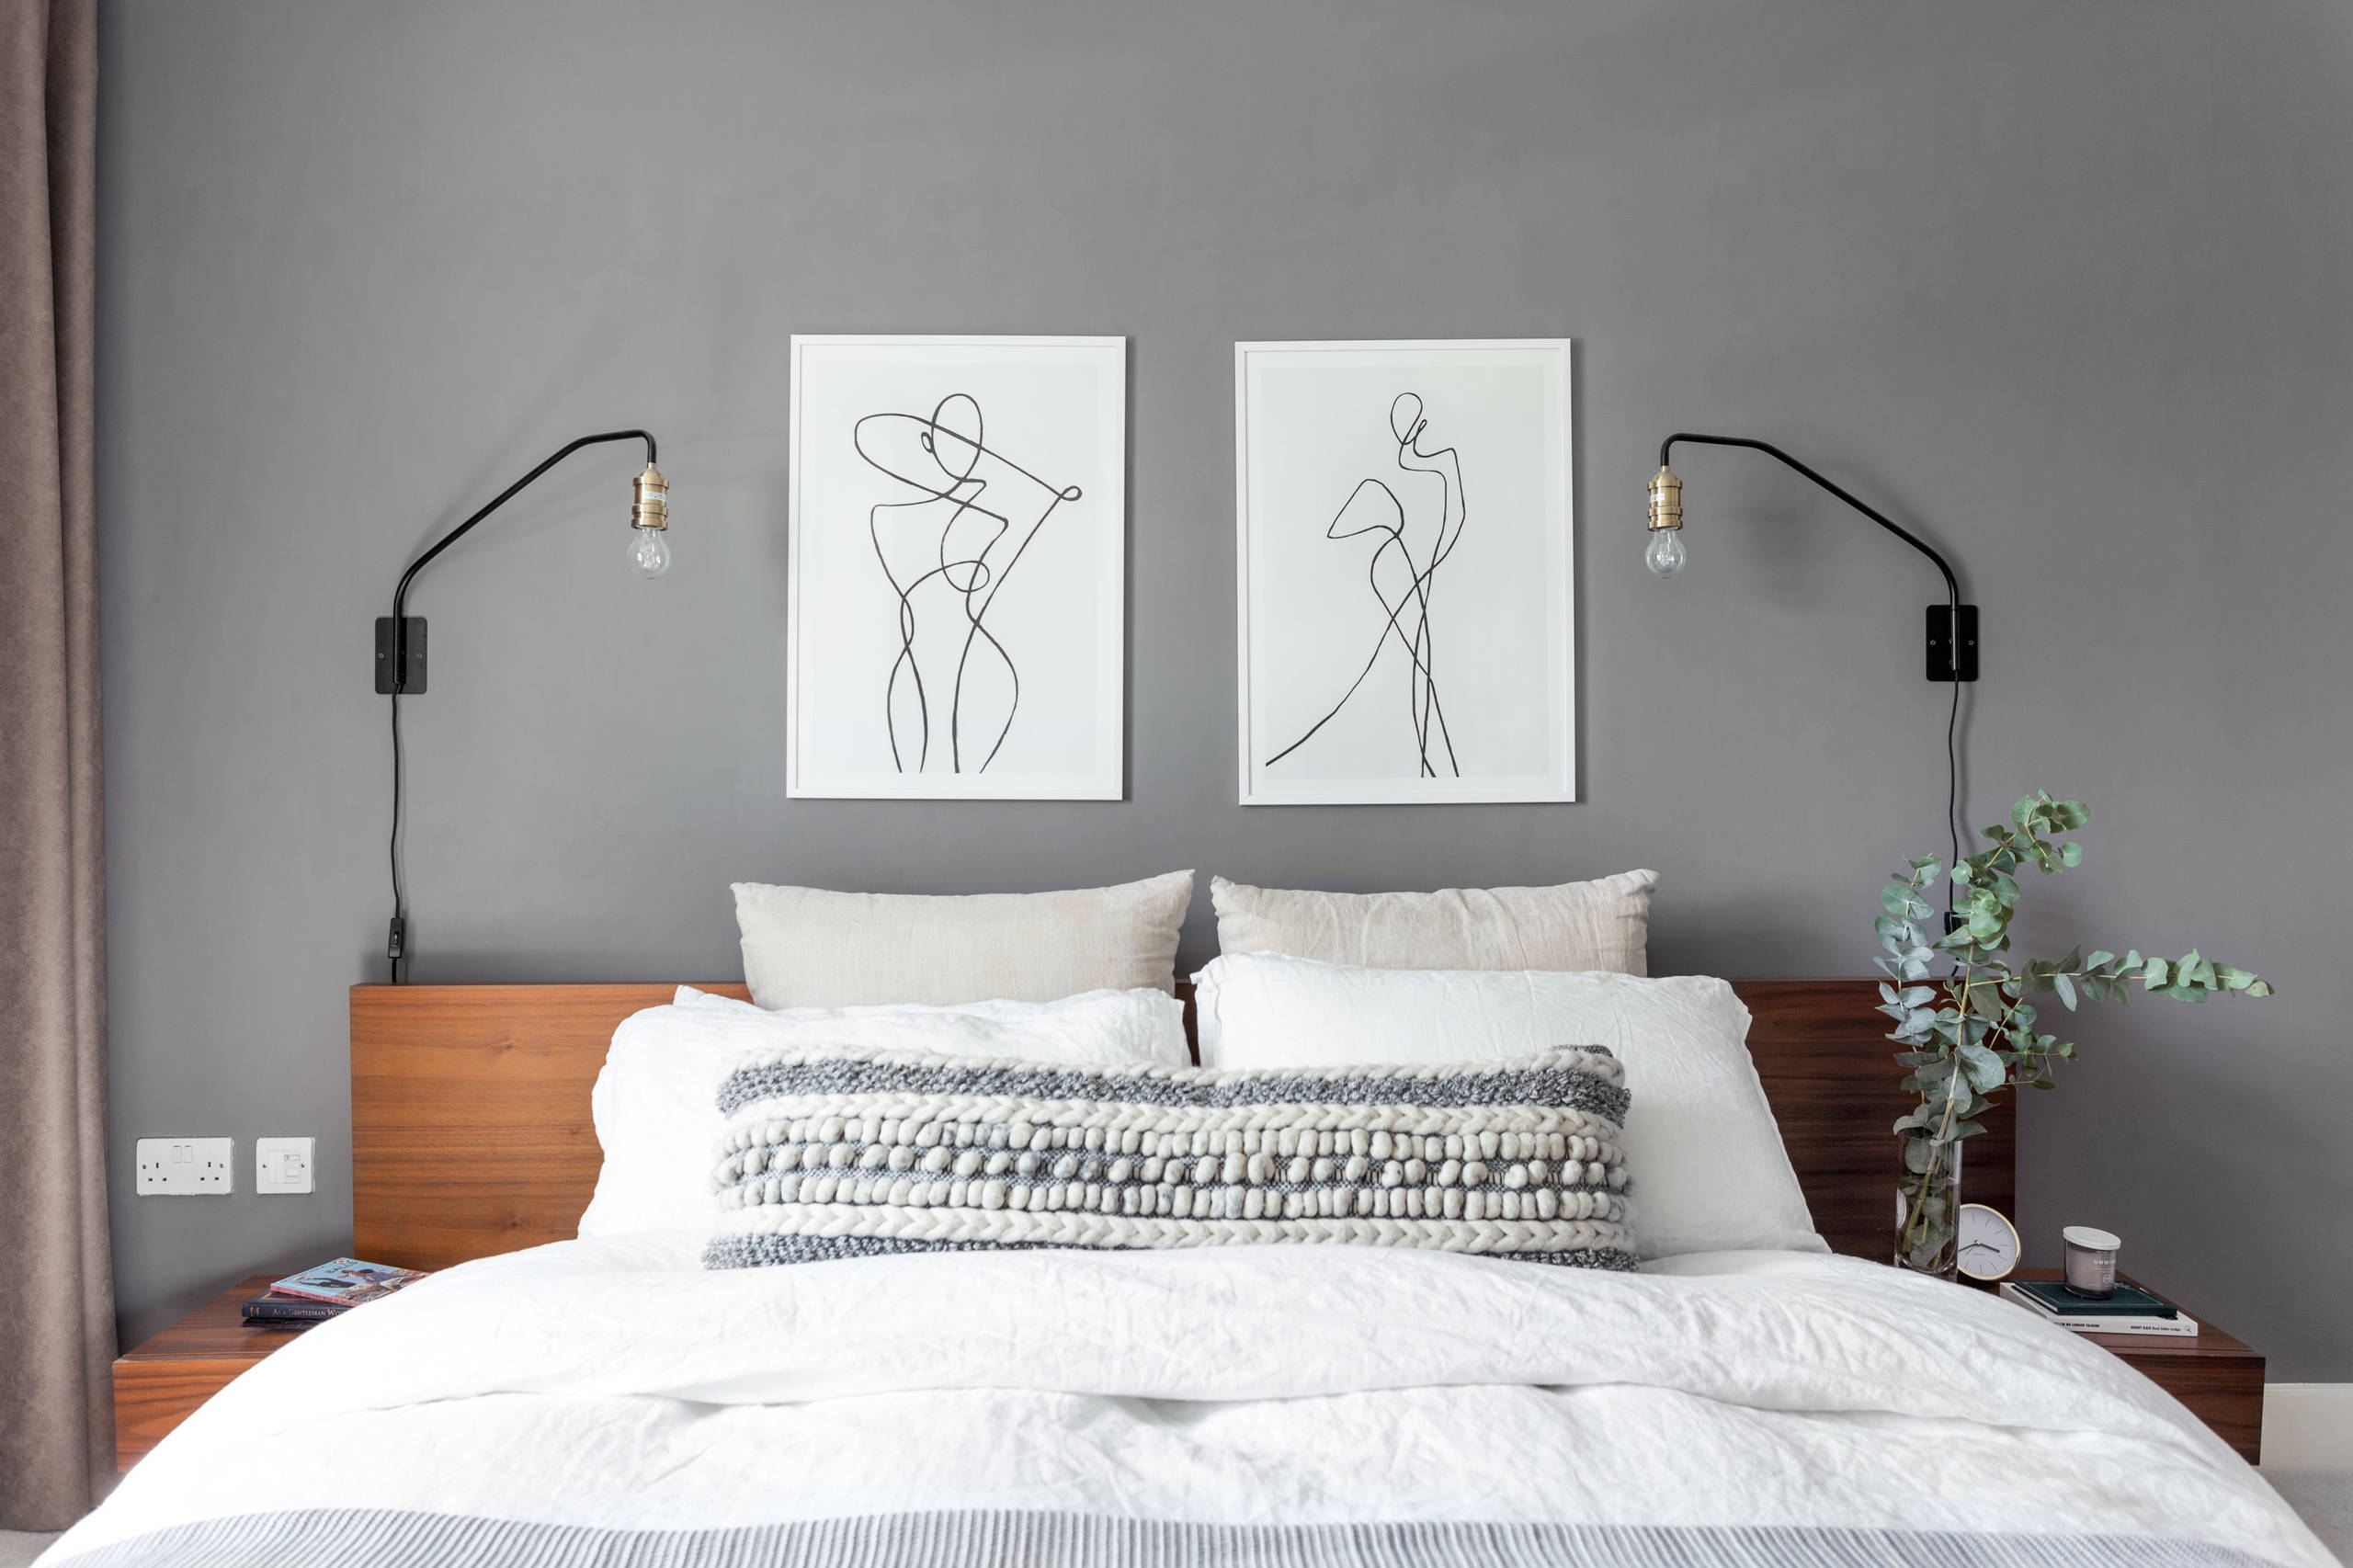 Why You Should Never Hang Art Vertically In The Bedroom